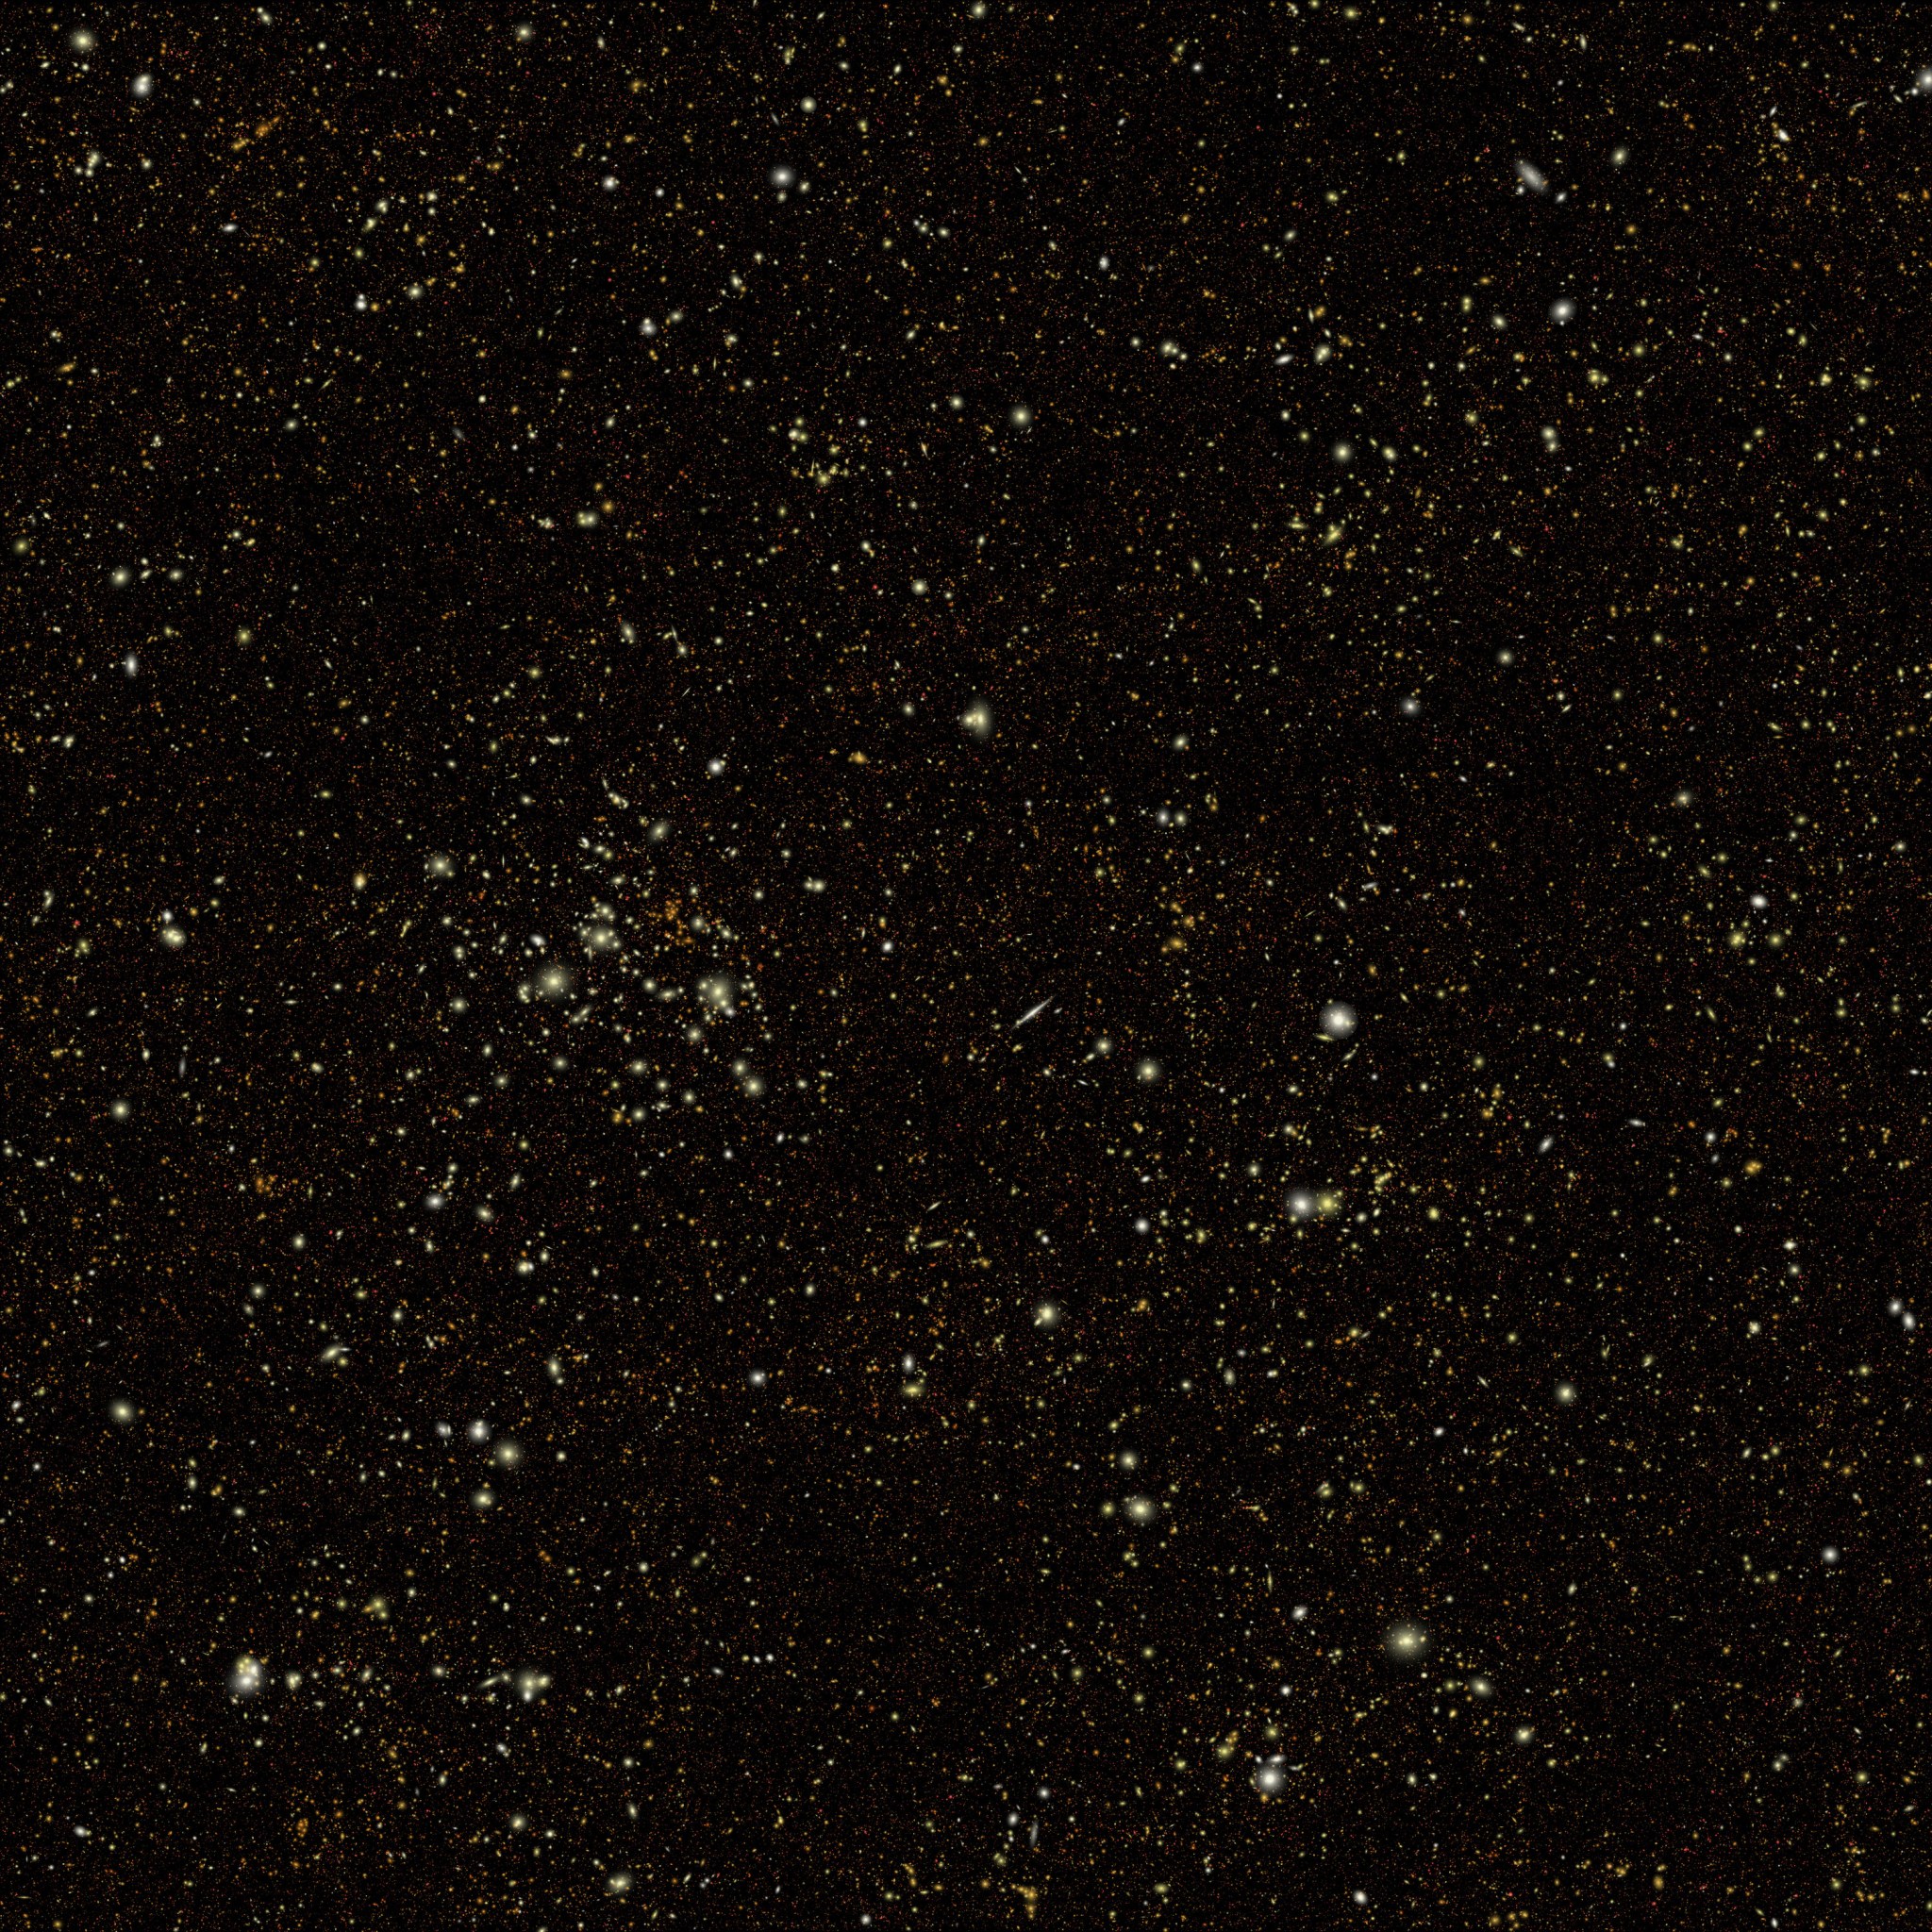 A black background is speckled with millions of tiny dots. The smallest ones are red, and slightly larger ones are yellow and white. The larger ones are occasionally surrounded by glows when they're particularly big, and some have blob-like shapes.